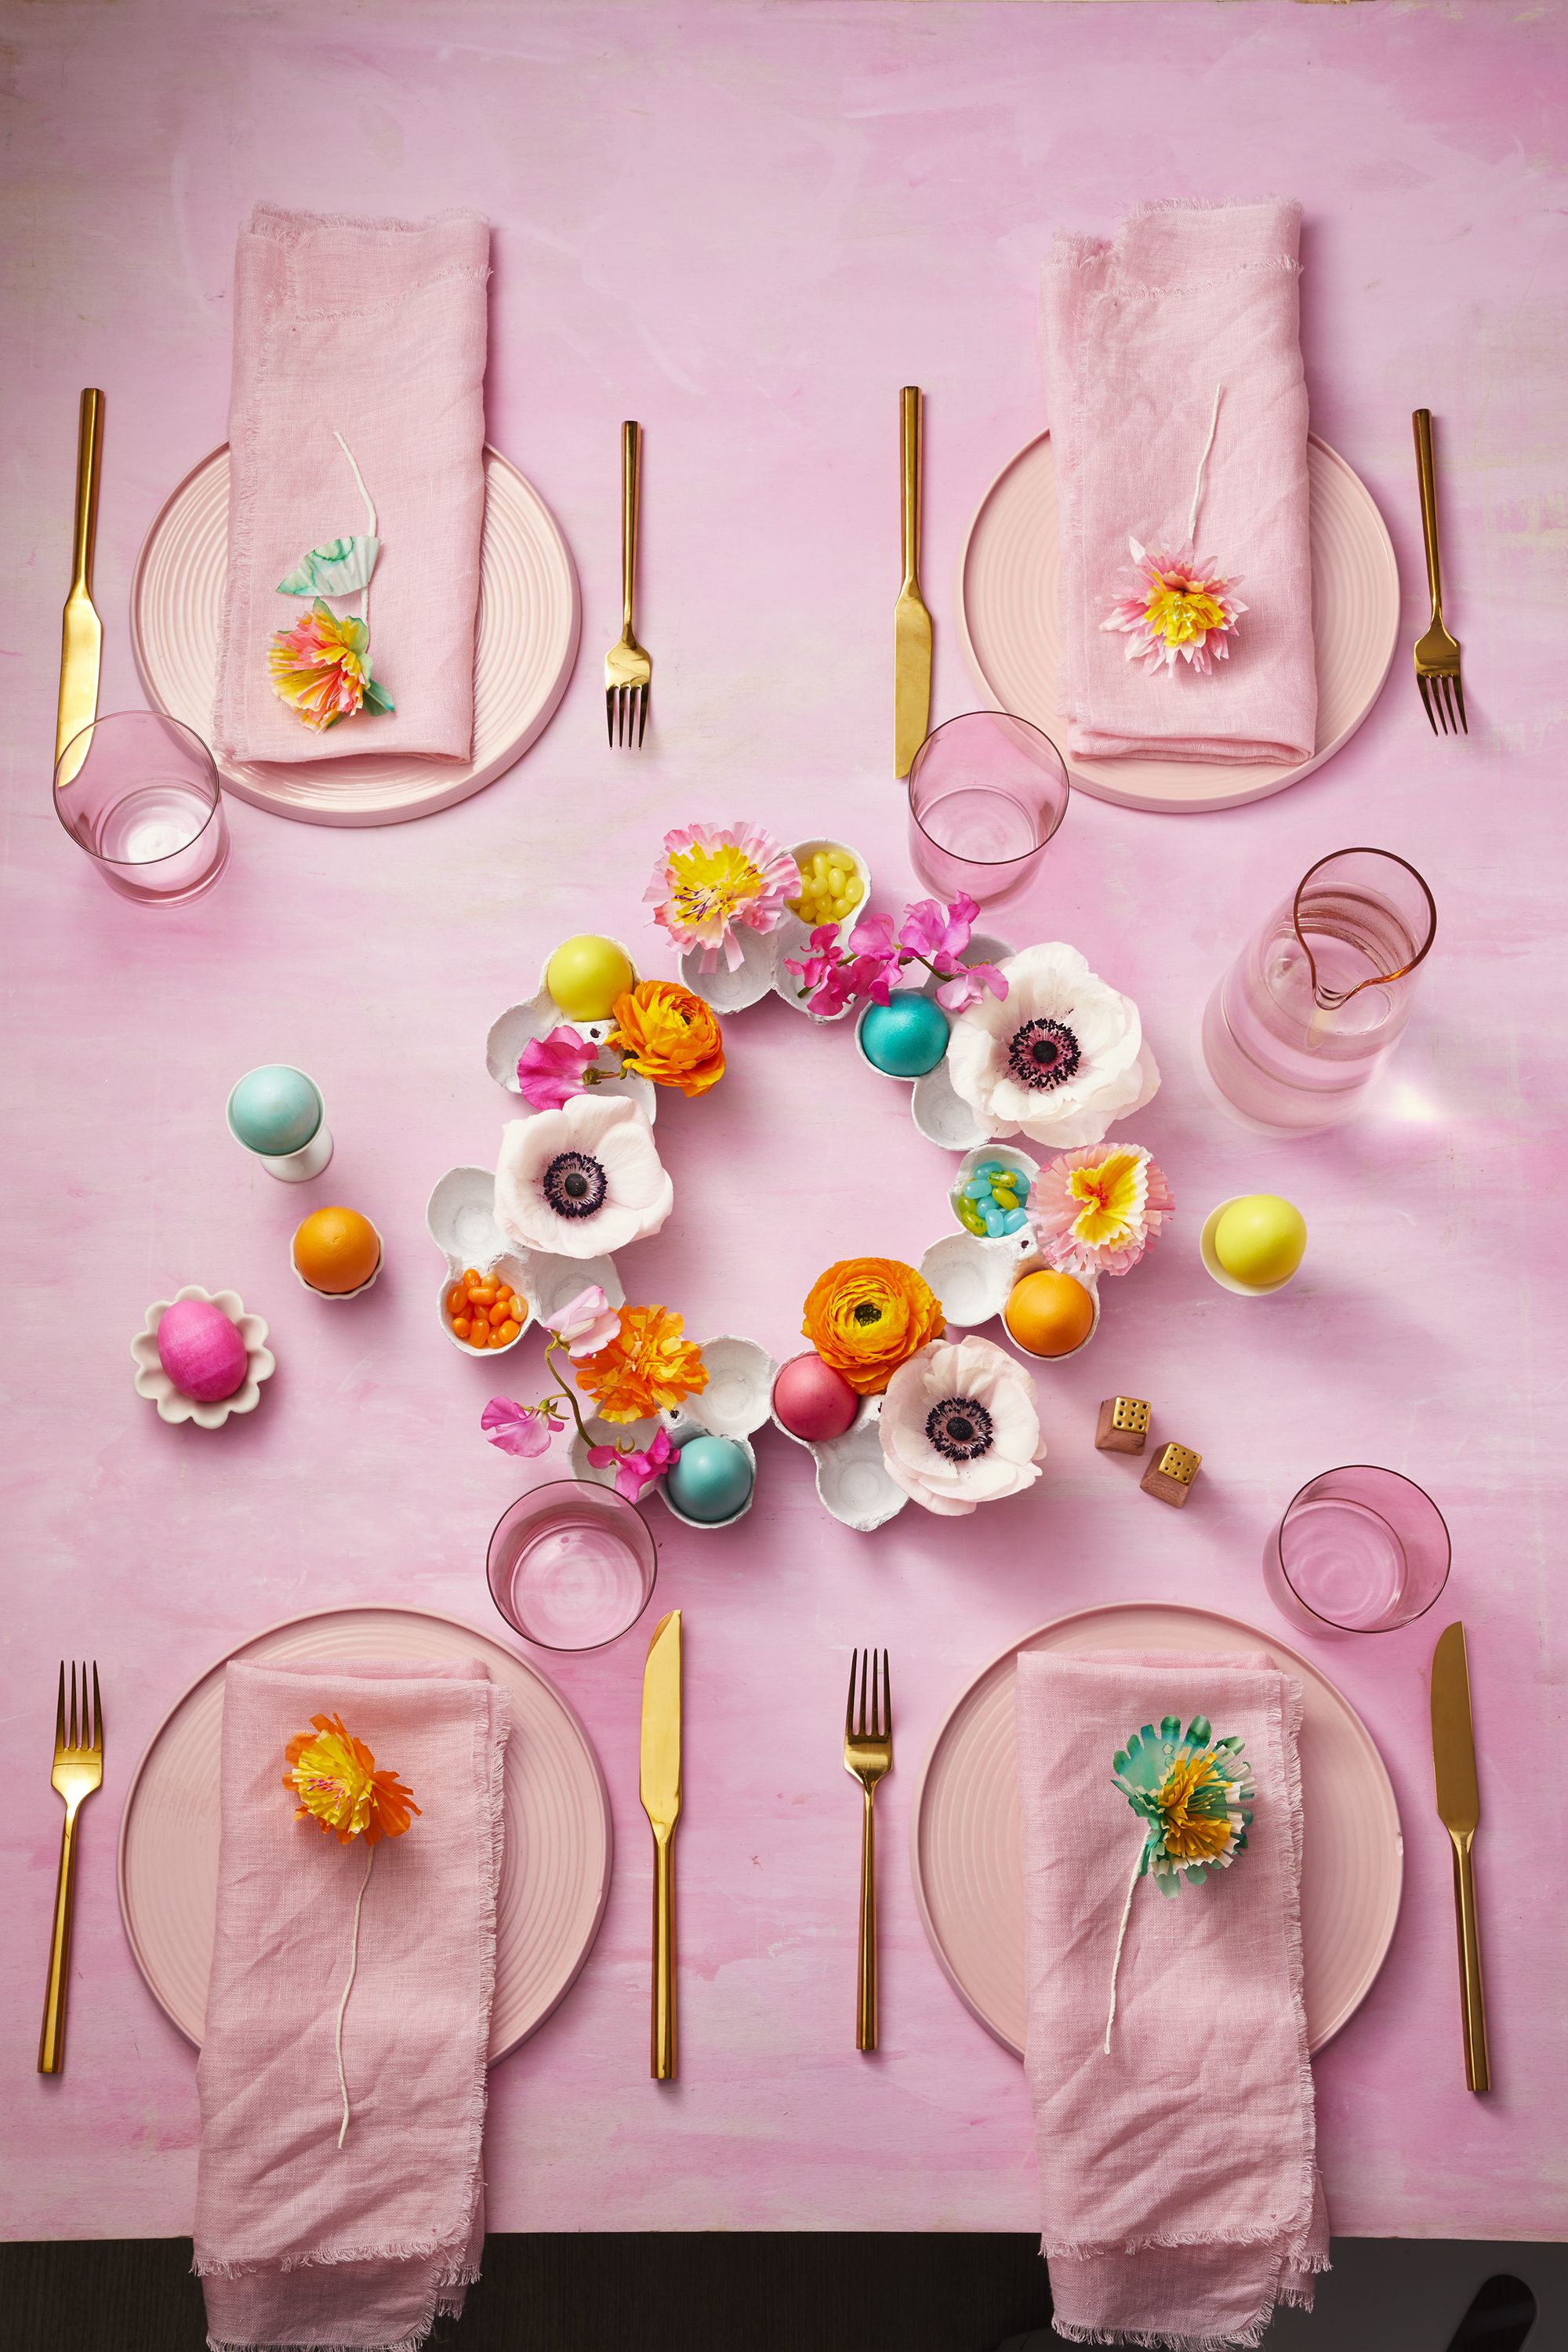 52 Beautiful Spring Centerpiece Ideas for Your Table